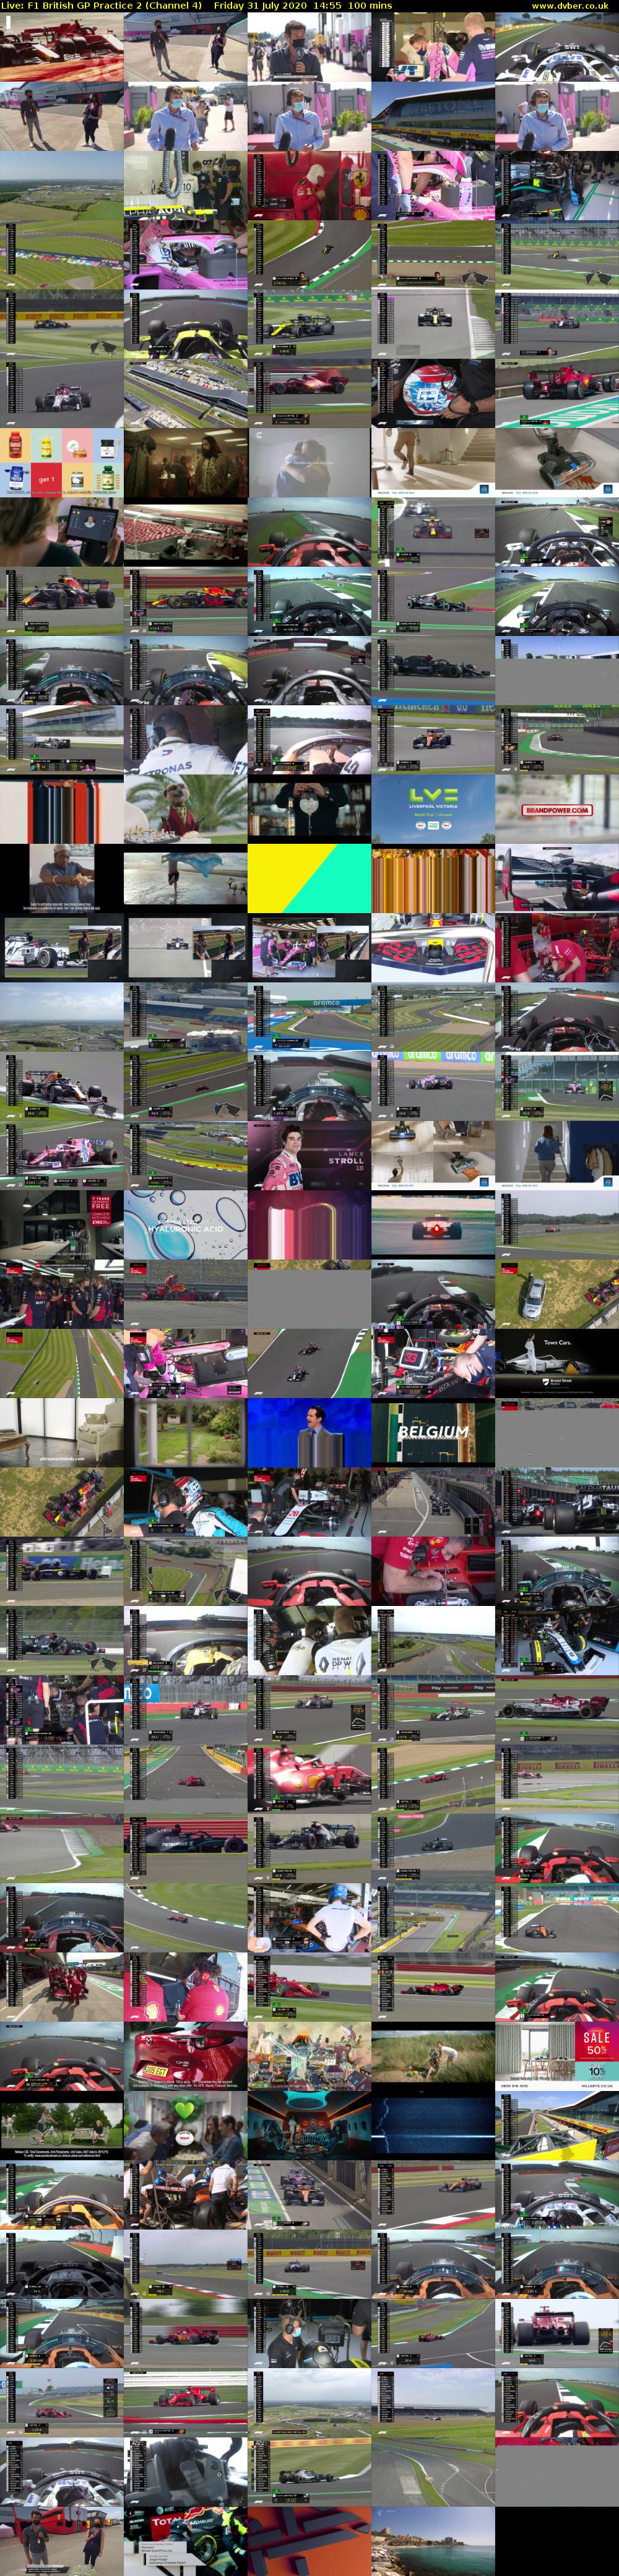 Live: F1 British GP Practice 2 (Channel 4) Friday 31 July 2020 14:55 - 16:35